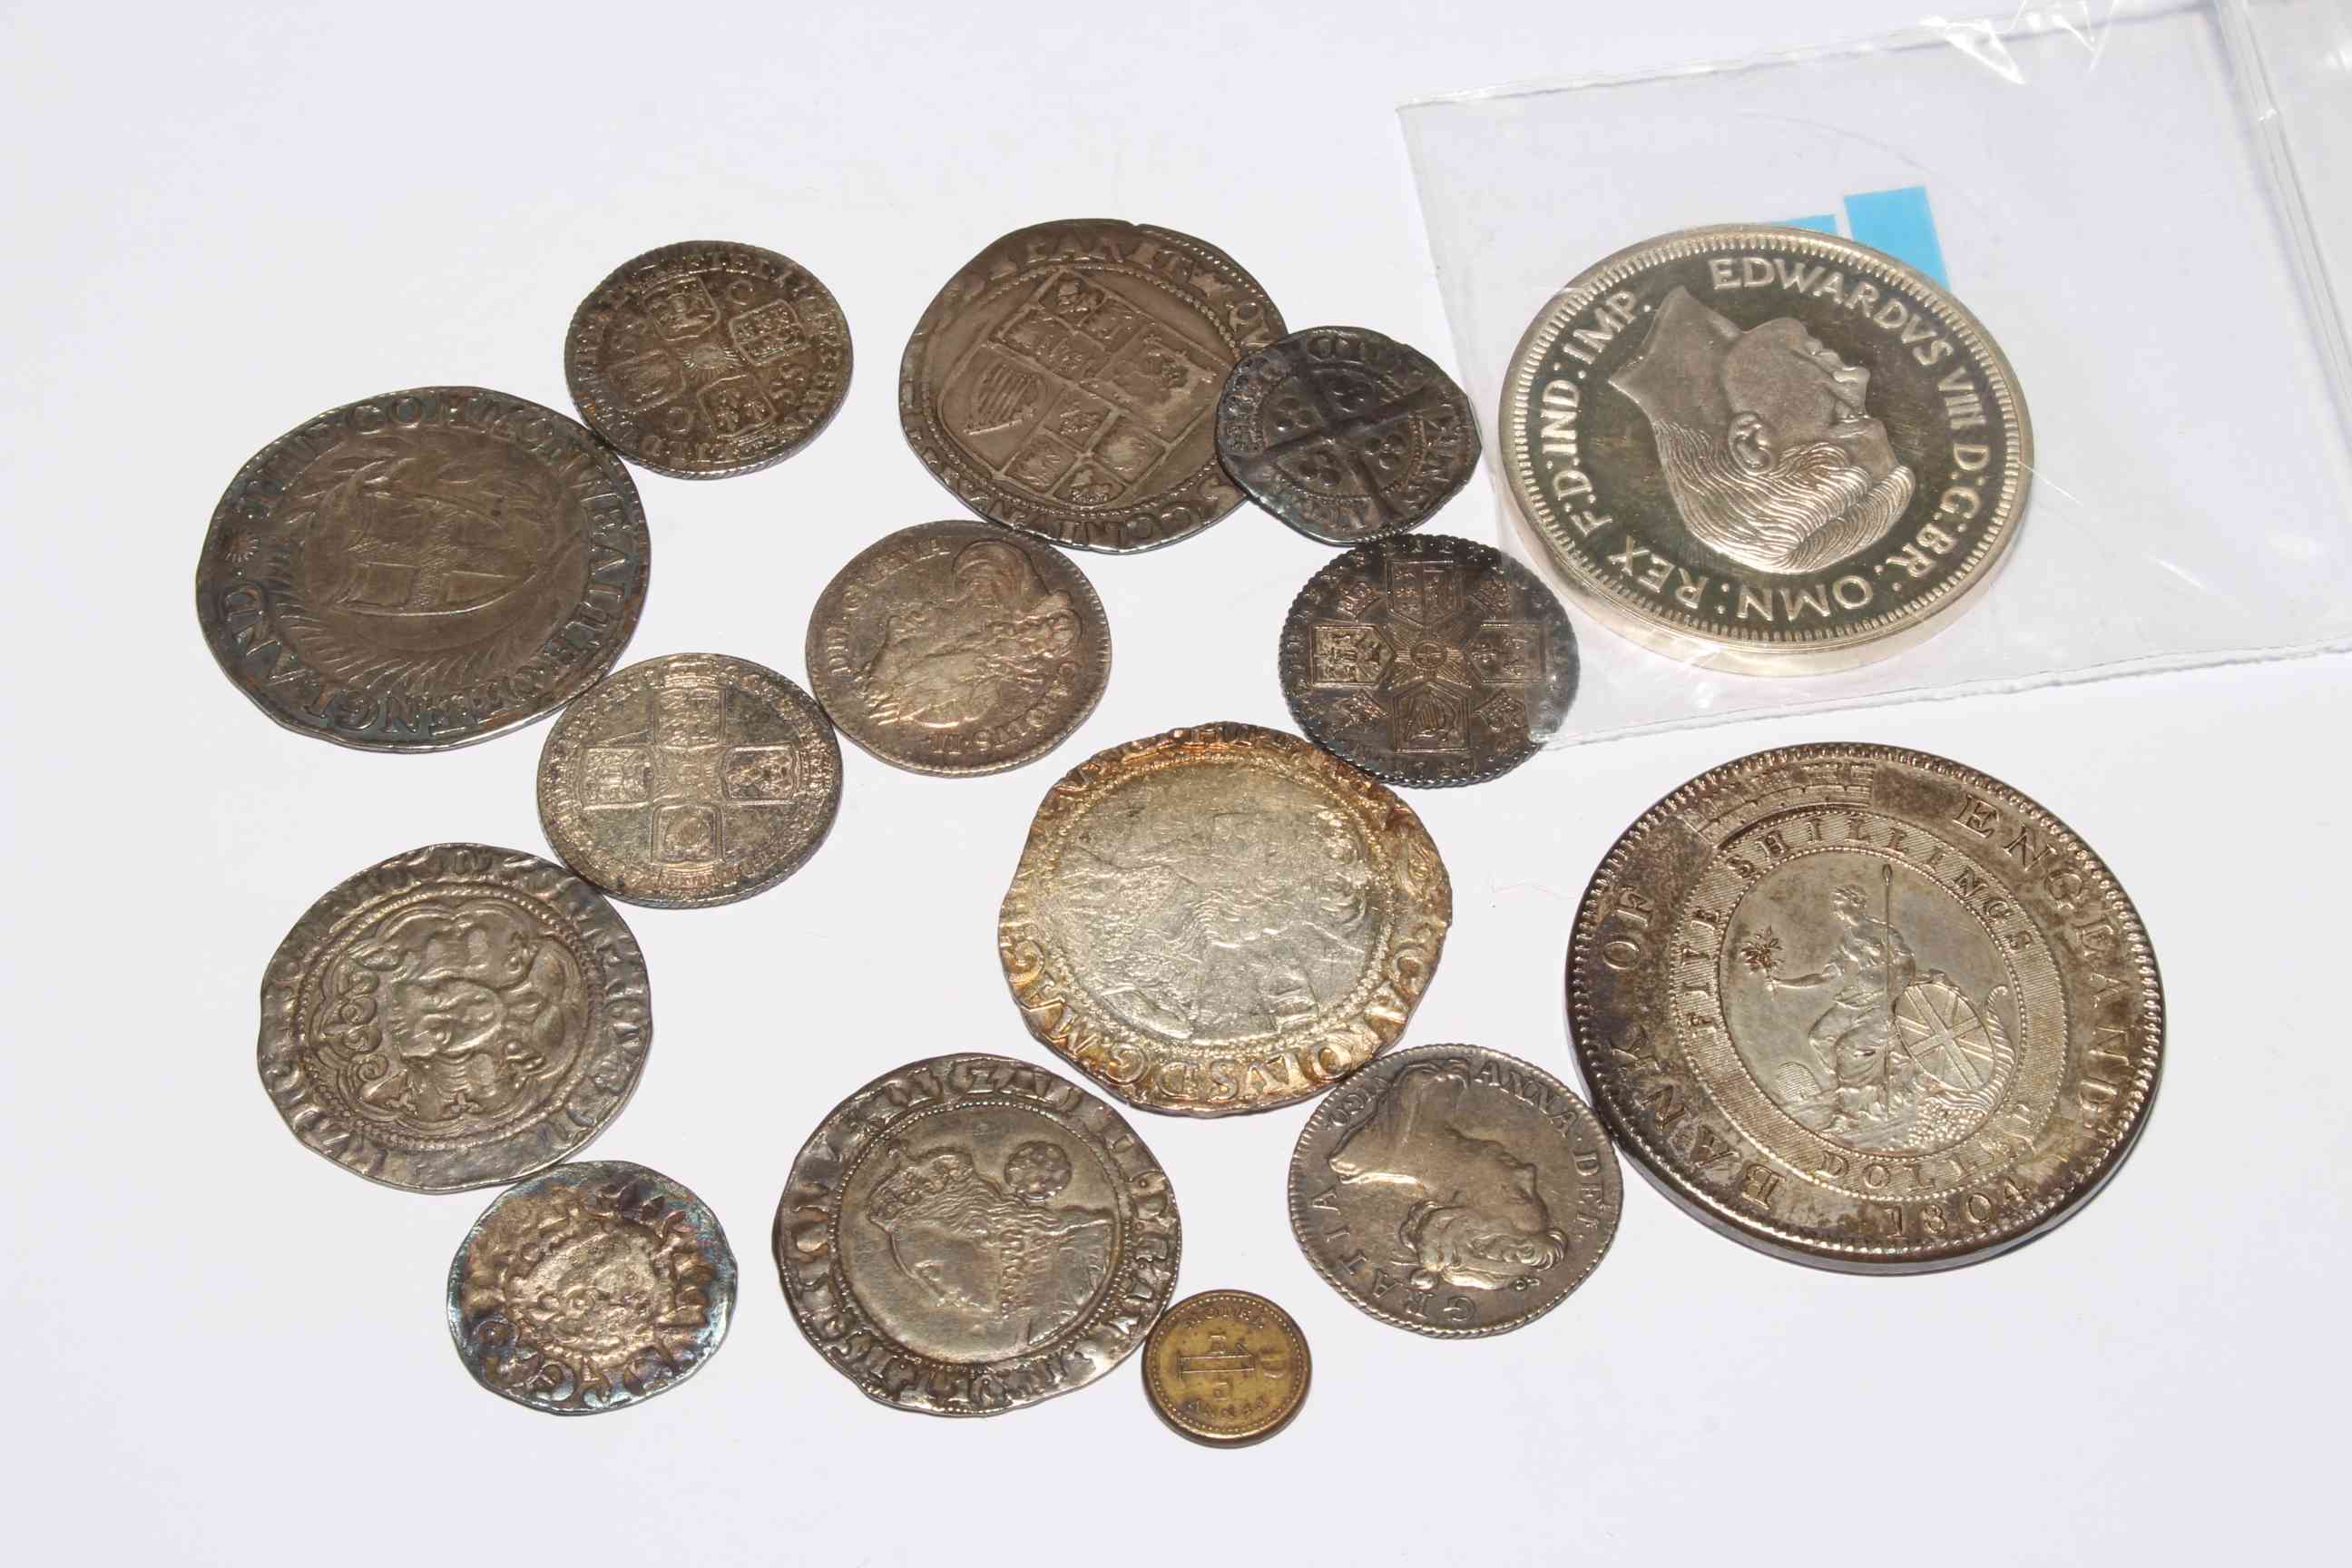 Early collection of coinage including 1651 shilling commonwealth, Edward IV groat? 1575 6d, 1677 6d,